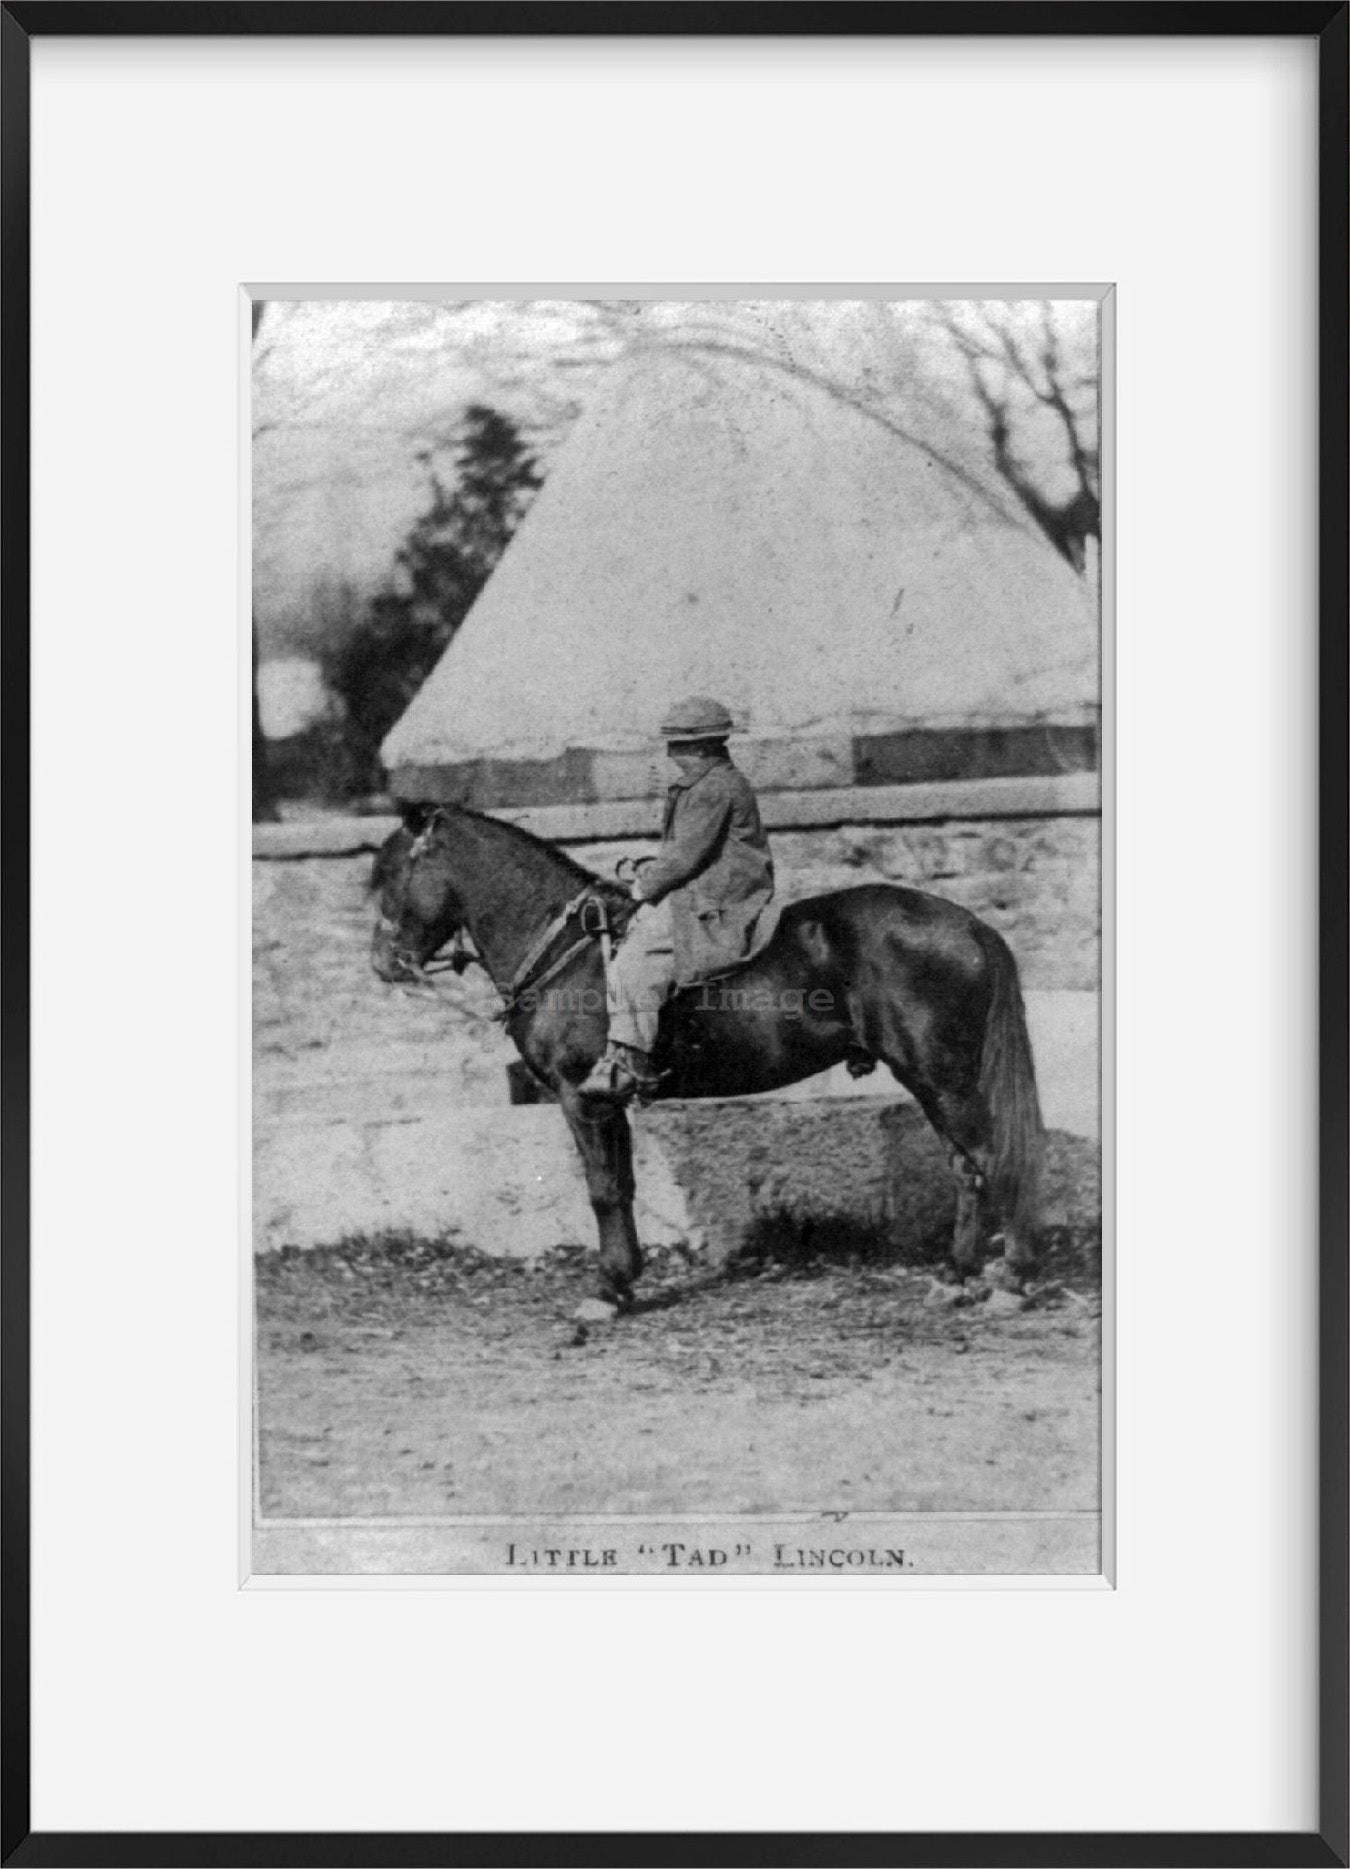 1902 Photo Little "Tad" Lincoln a side view of Thomas "Tad" Lincoln sitting astr